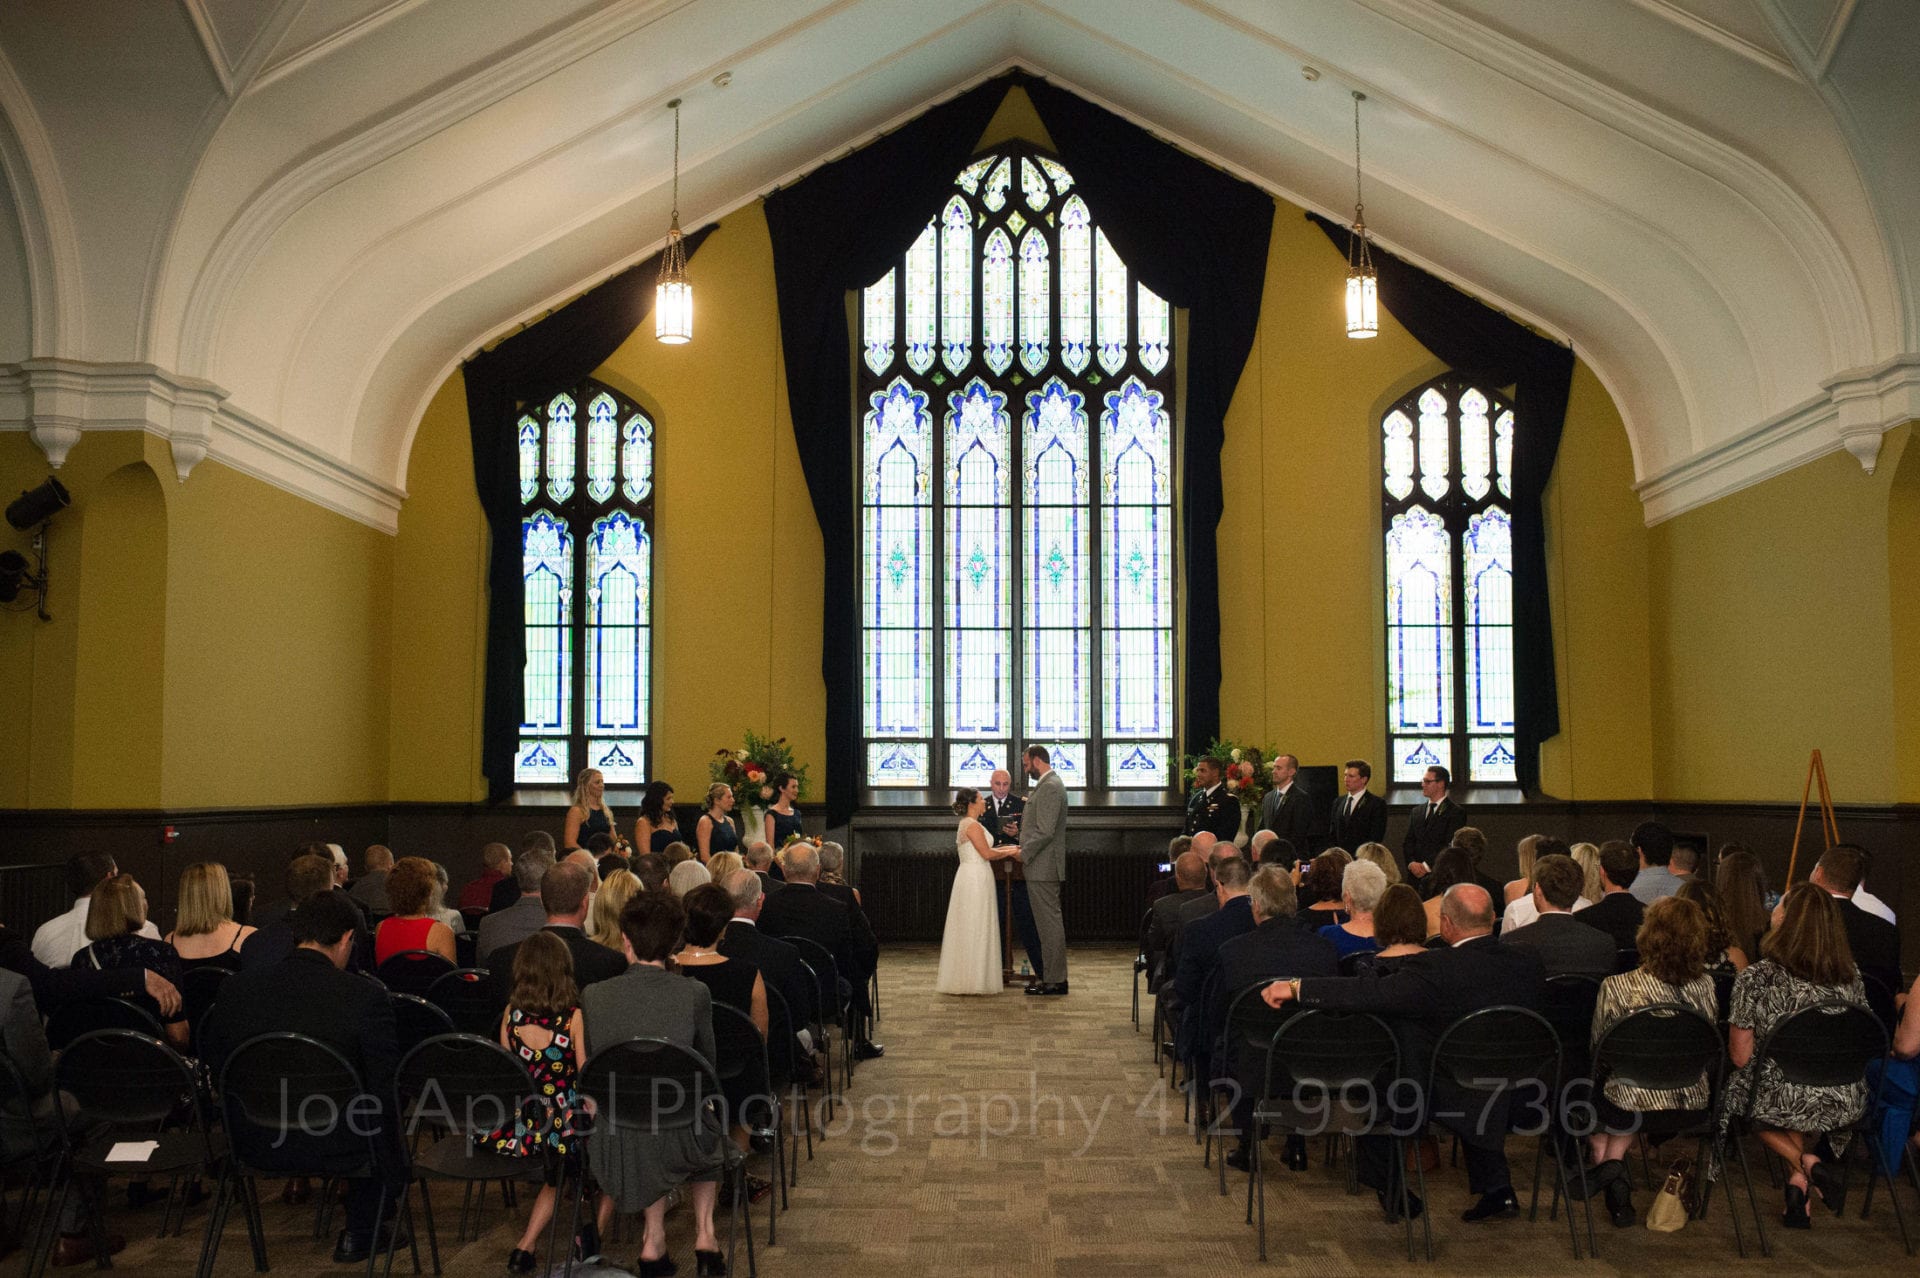 A bride and groom stand at the front of their ceremony with large stained glass windows behind them.